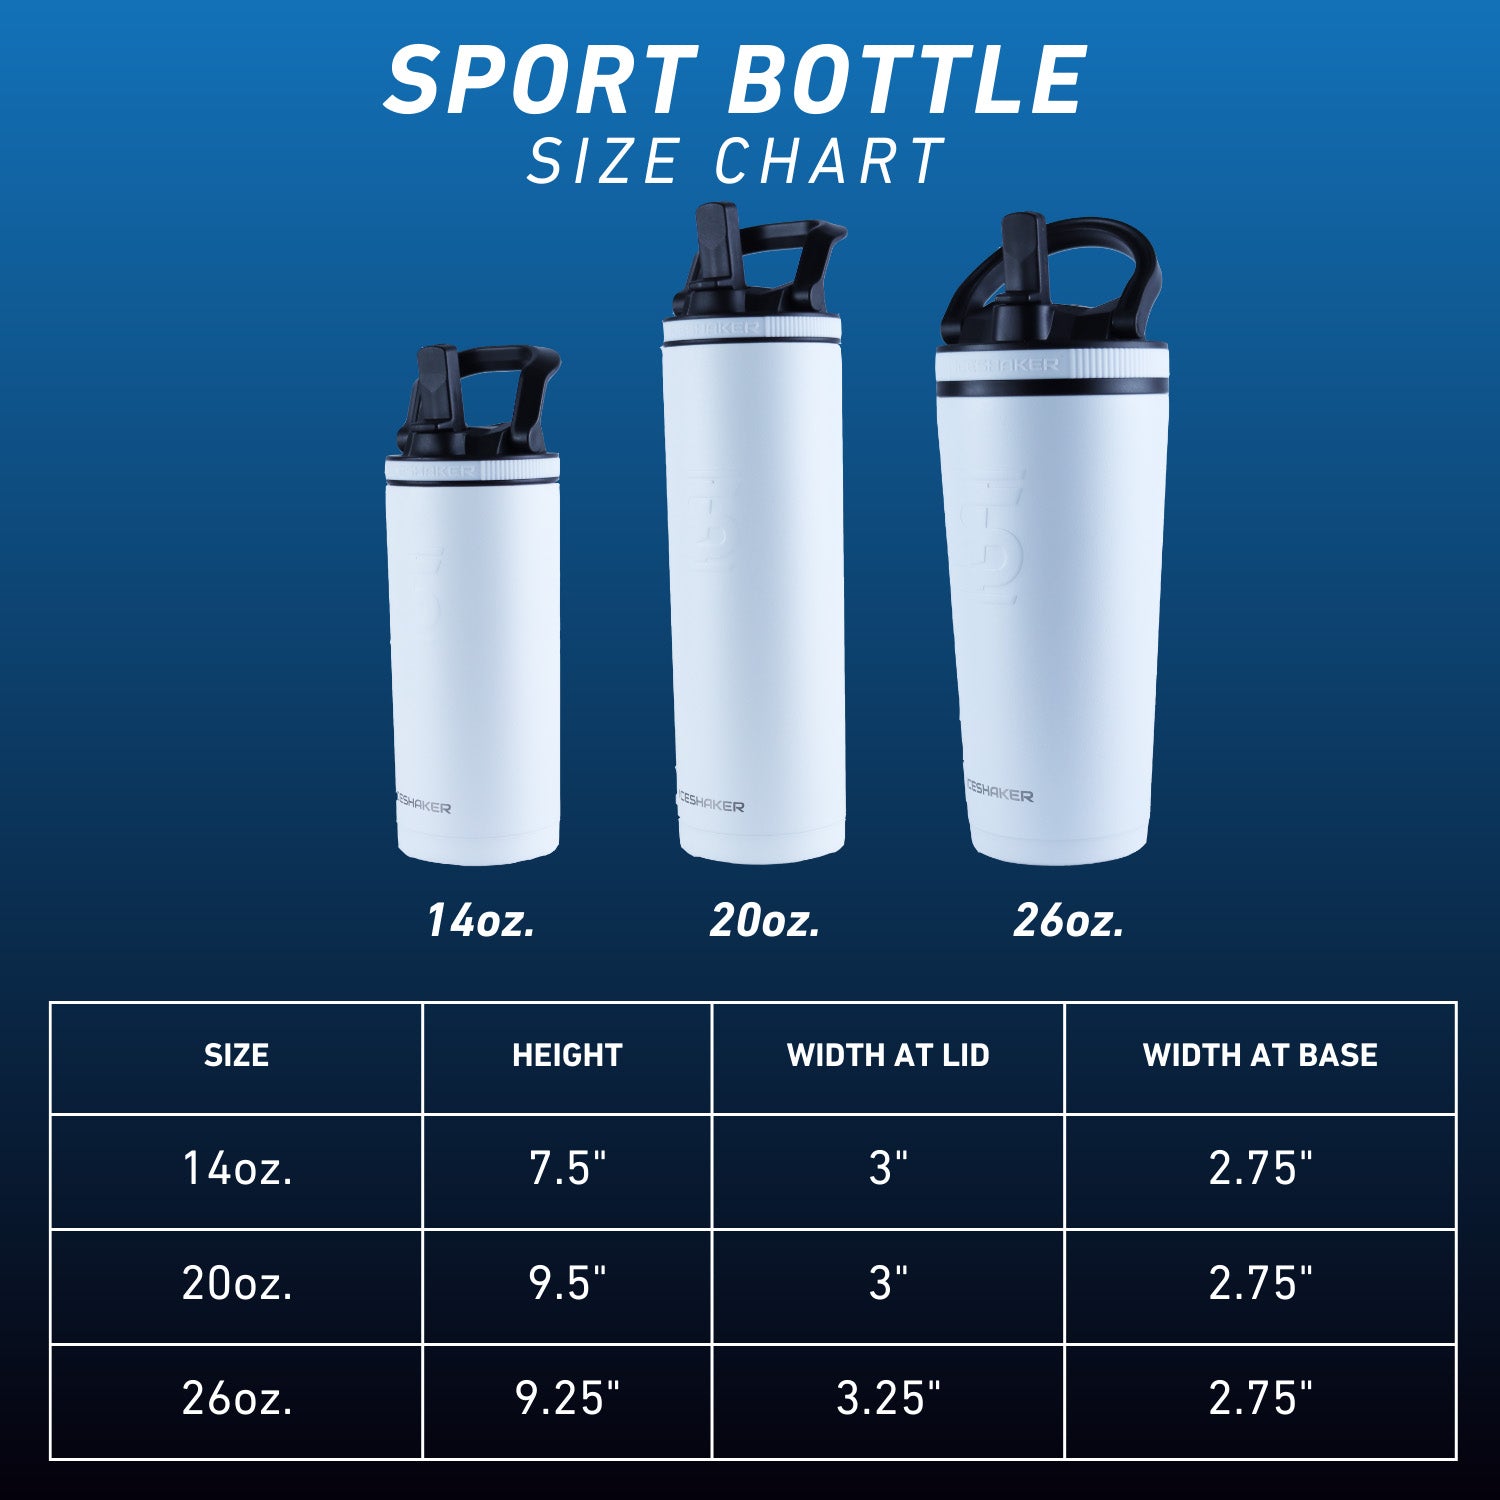 This size chart gives the following dimensions for each size. 14oz Sport Bottle Dimensions: 7.5 inches high by 3 inches wide at the lid by 2.75 inches wide at the base. 20oz Sport Bottle Dimensions: 9.5 inches high by 3 inches wide at the lid by 2.75 inches wide at the base of the cup. 26oz Sport Bottle Dimensions: 9.25 inches high by 3.25 inches wide at the lid of the cup by 2.75 inches wide at the base of the cup.